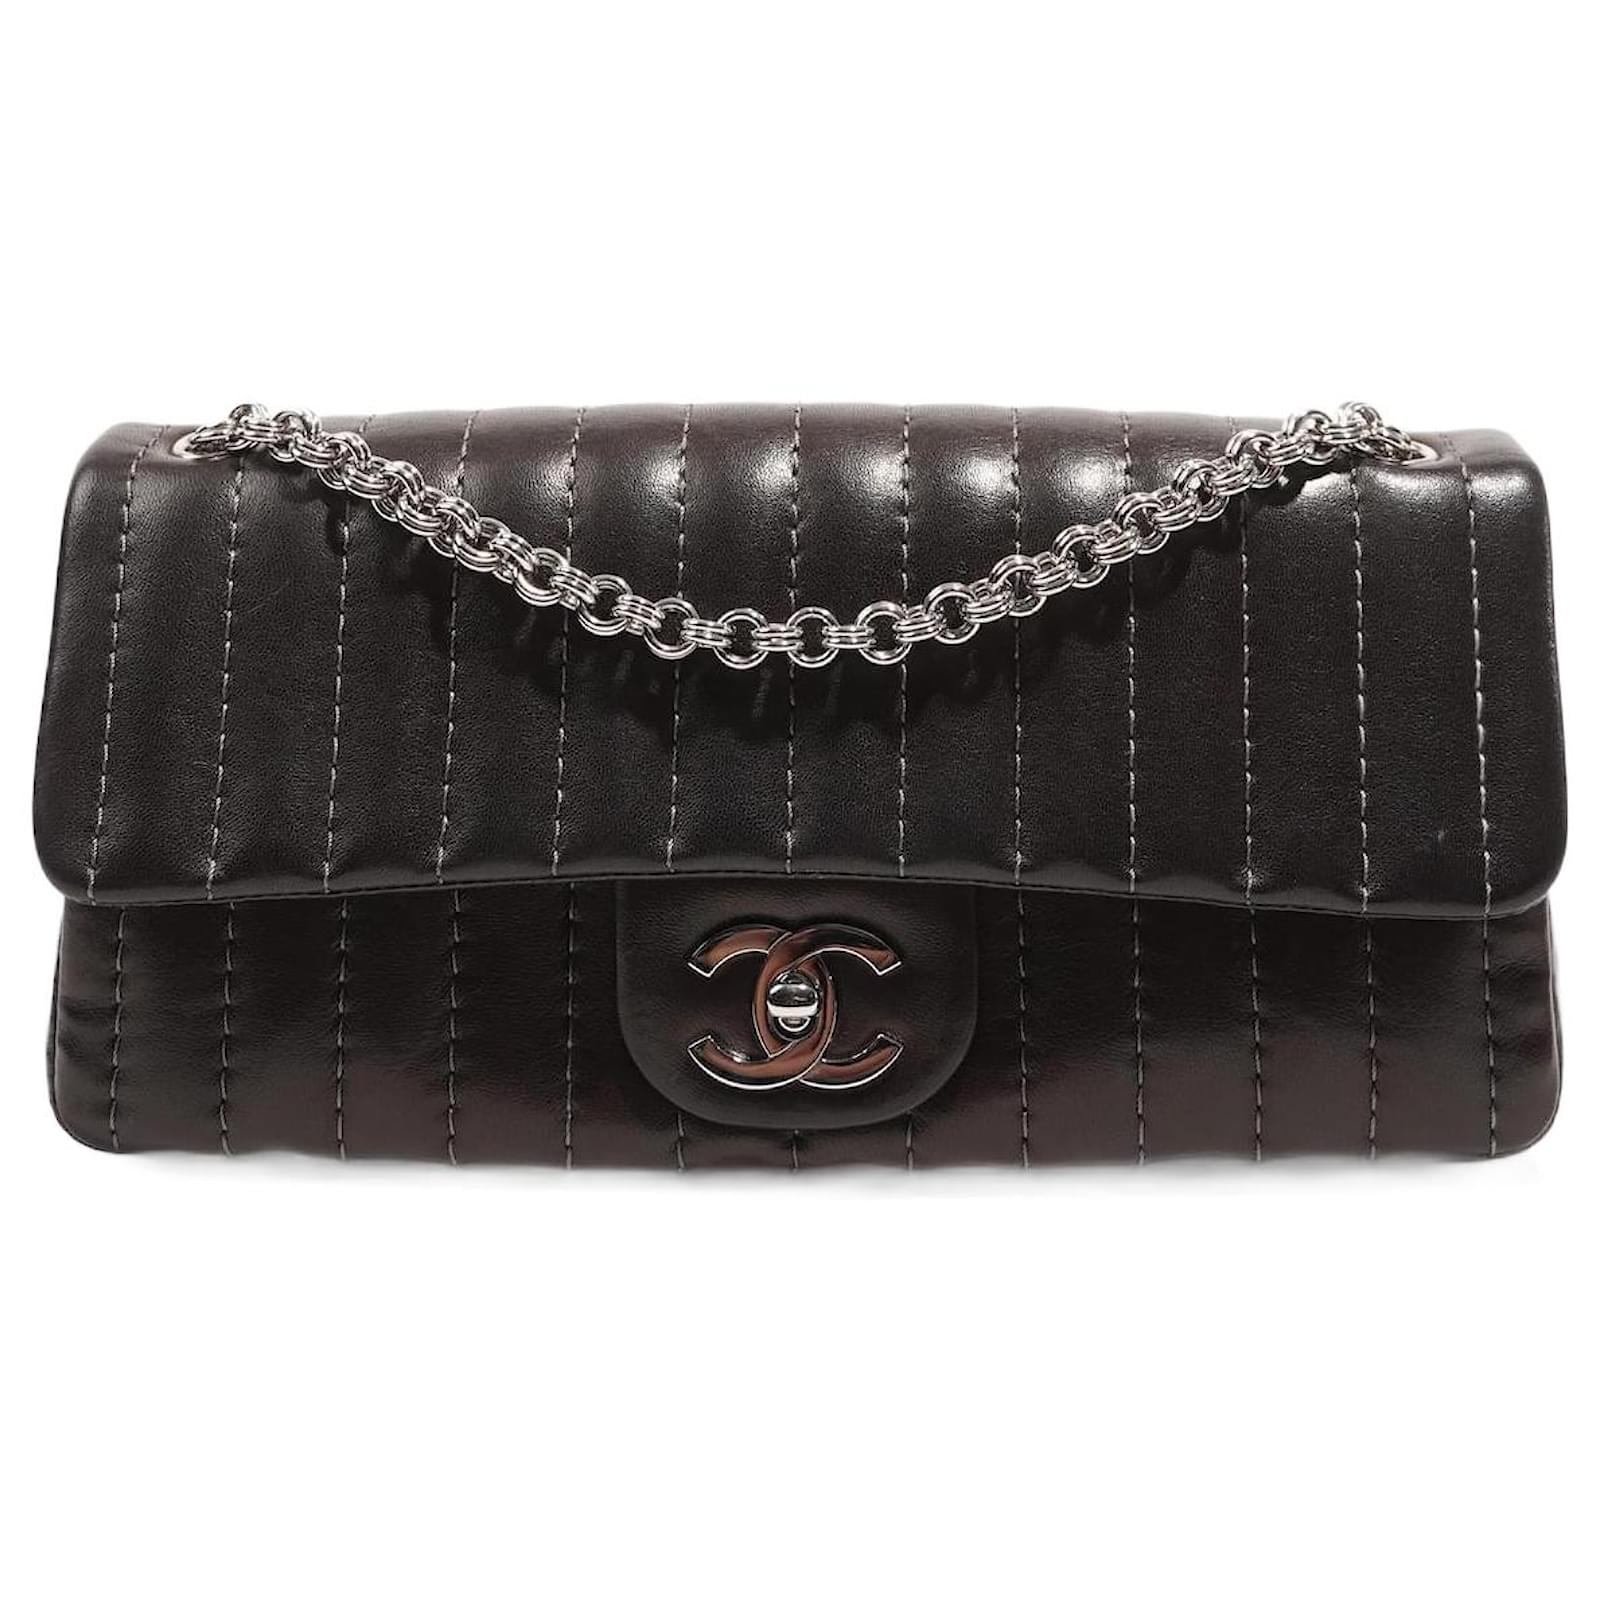 Chanel Black Square Quilted Lambskin Leather East-West Flap Bag